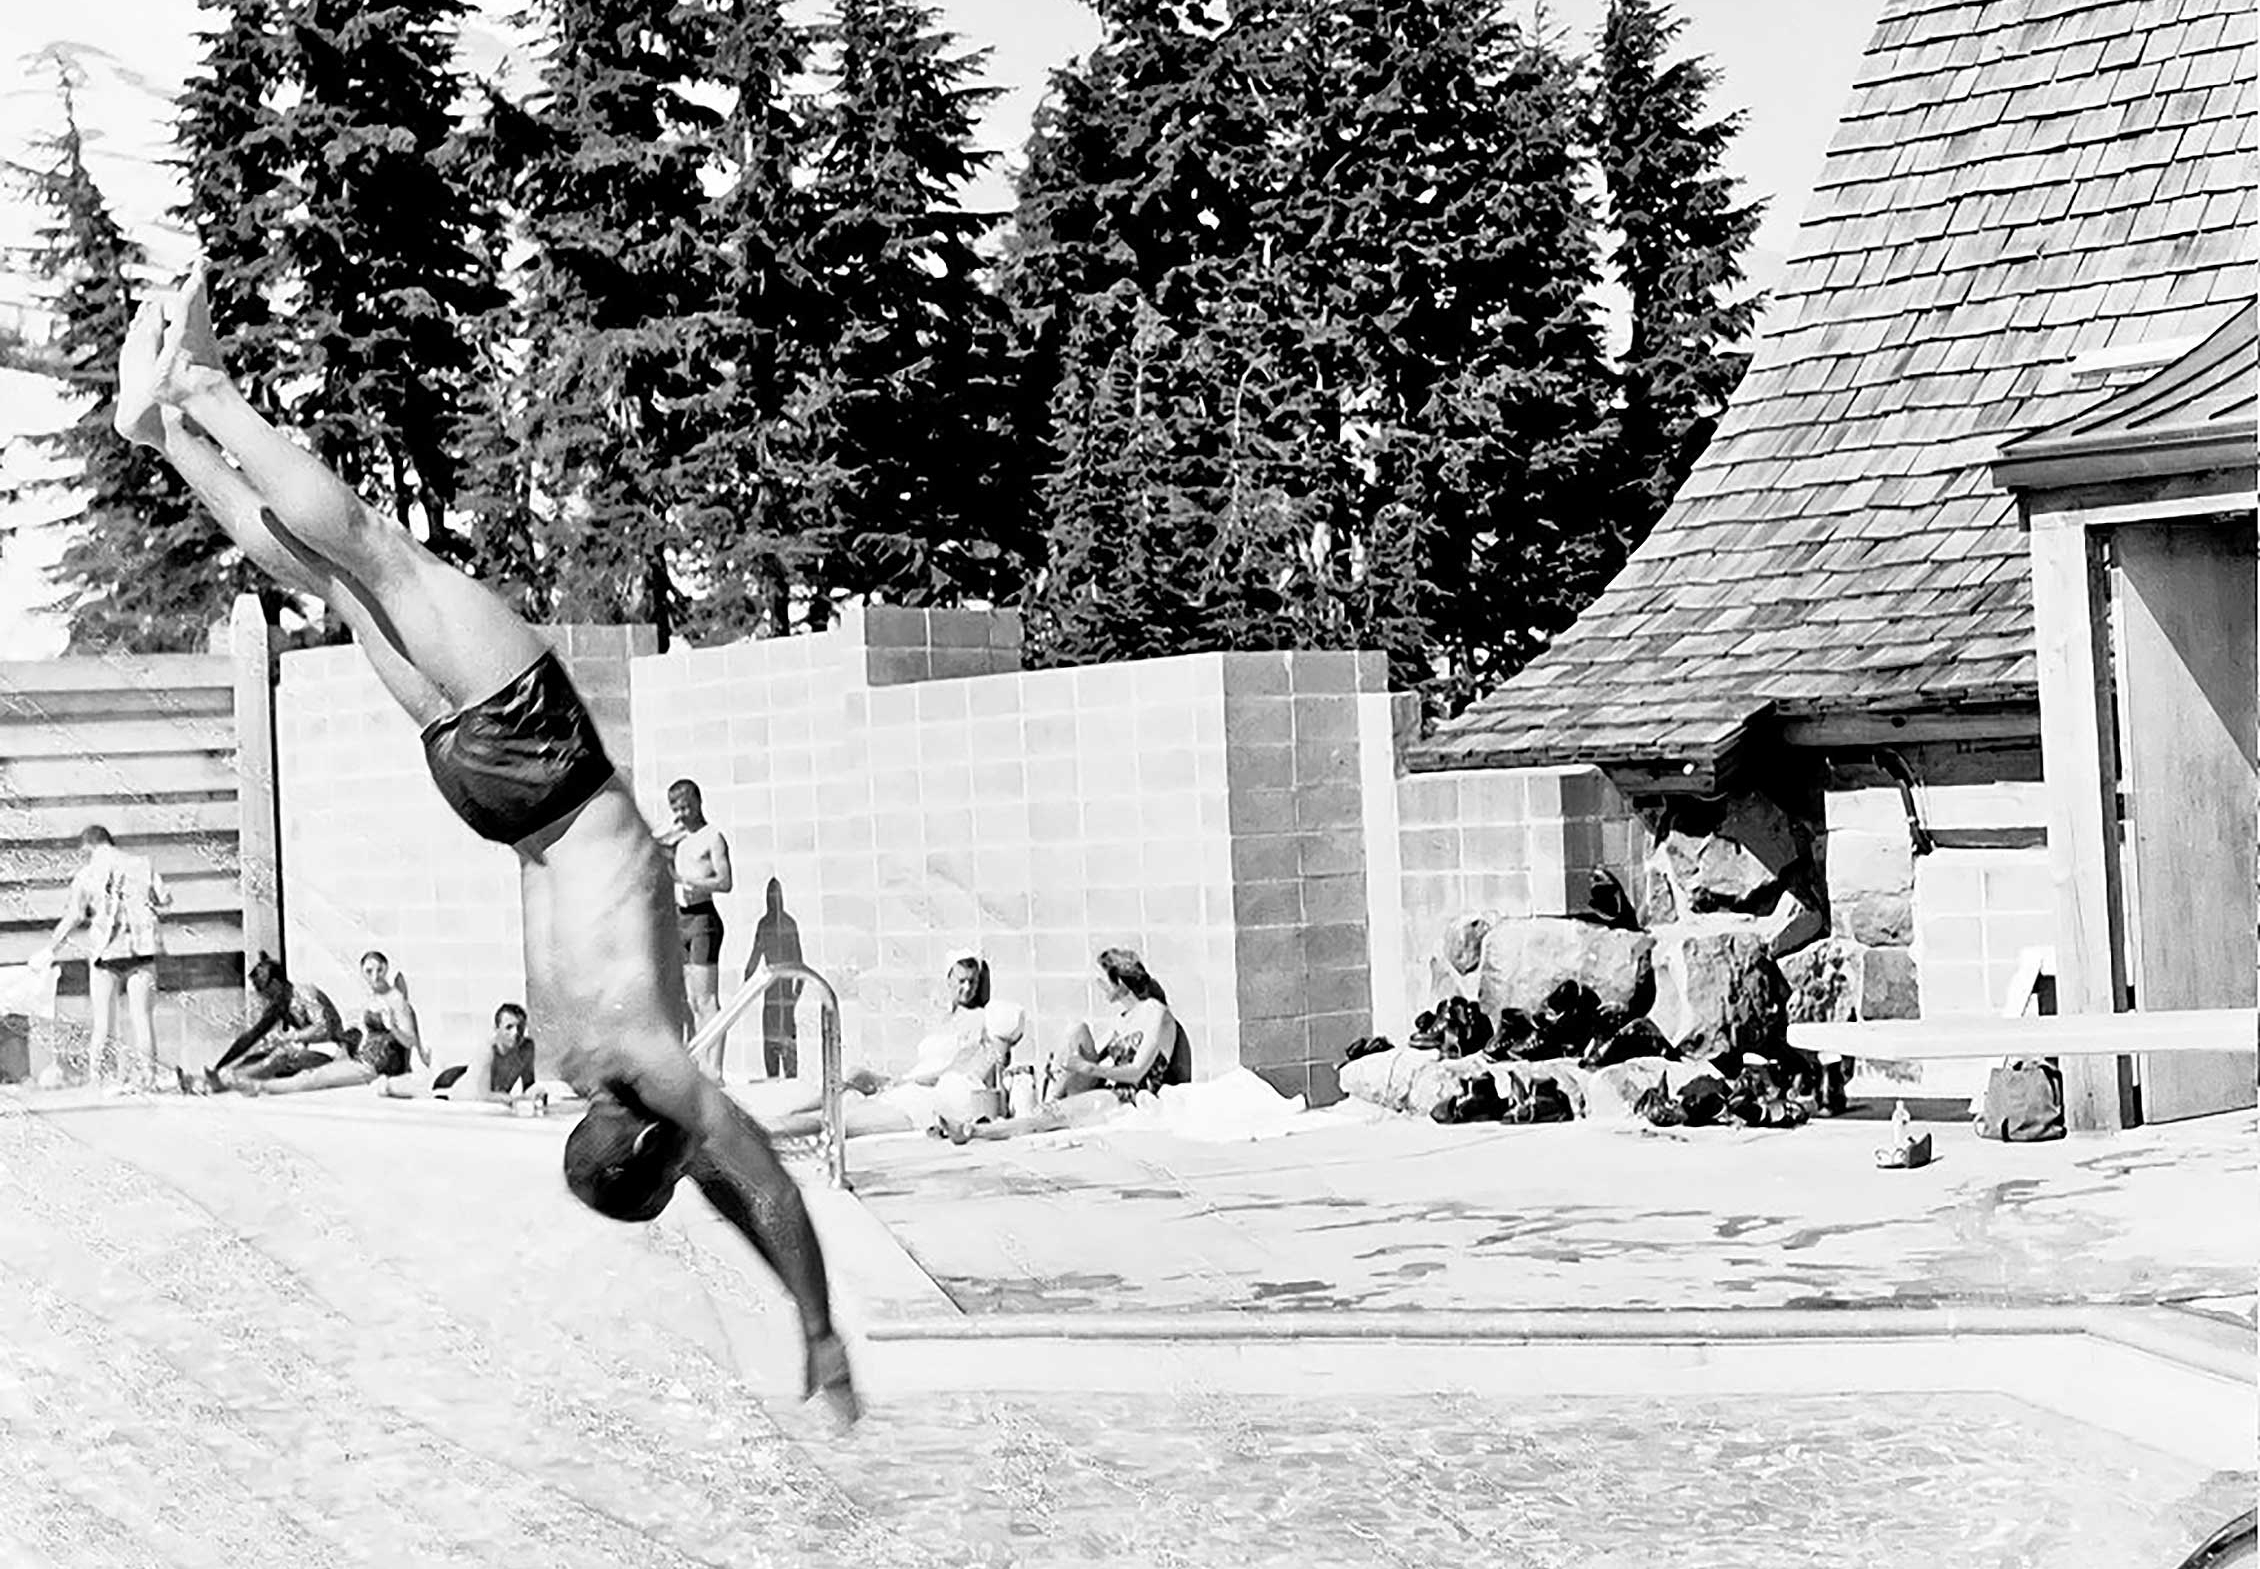 BOY DIVING INTO POOL IN THE 1950S